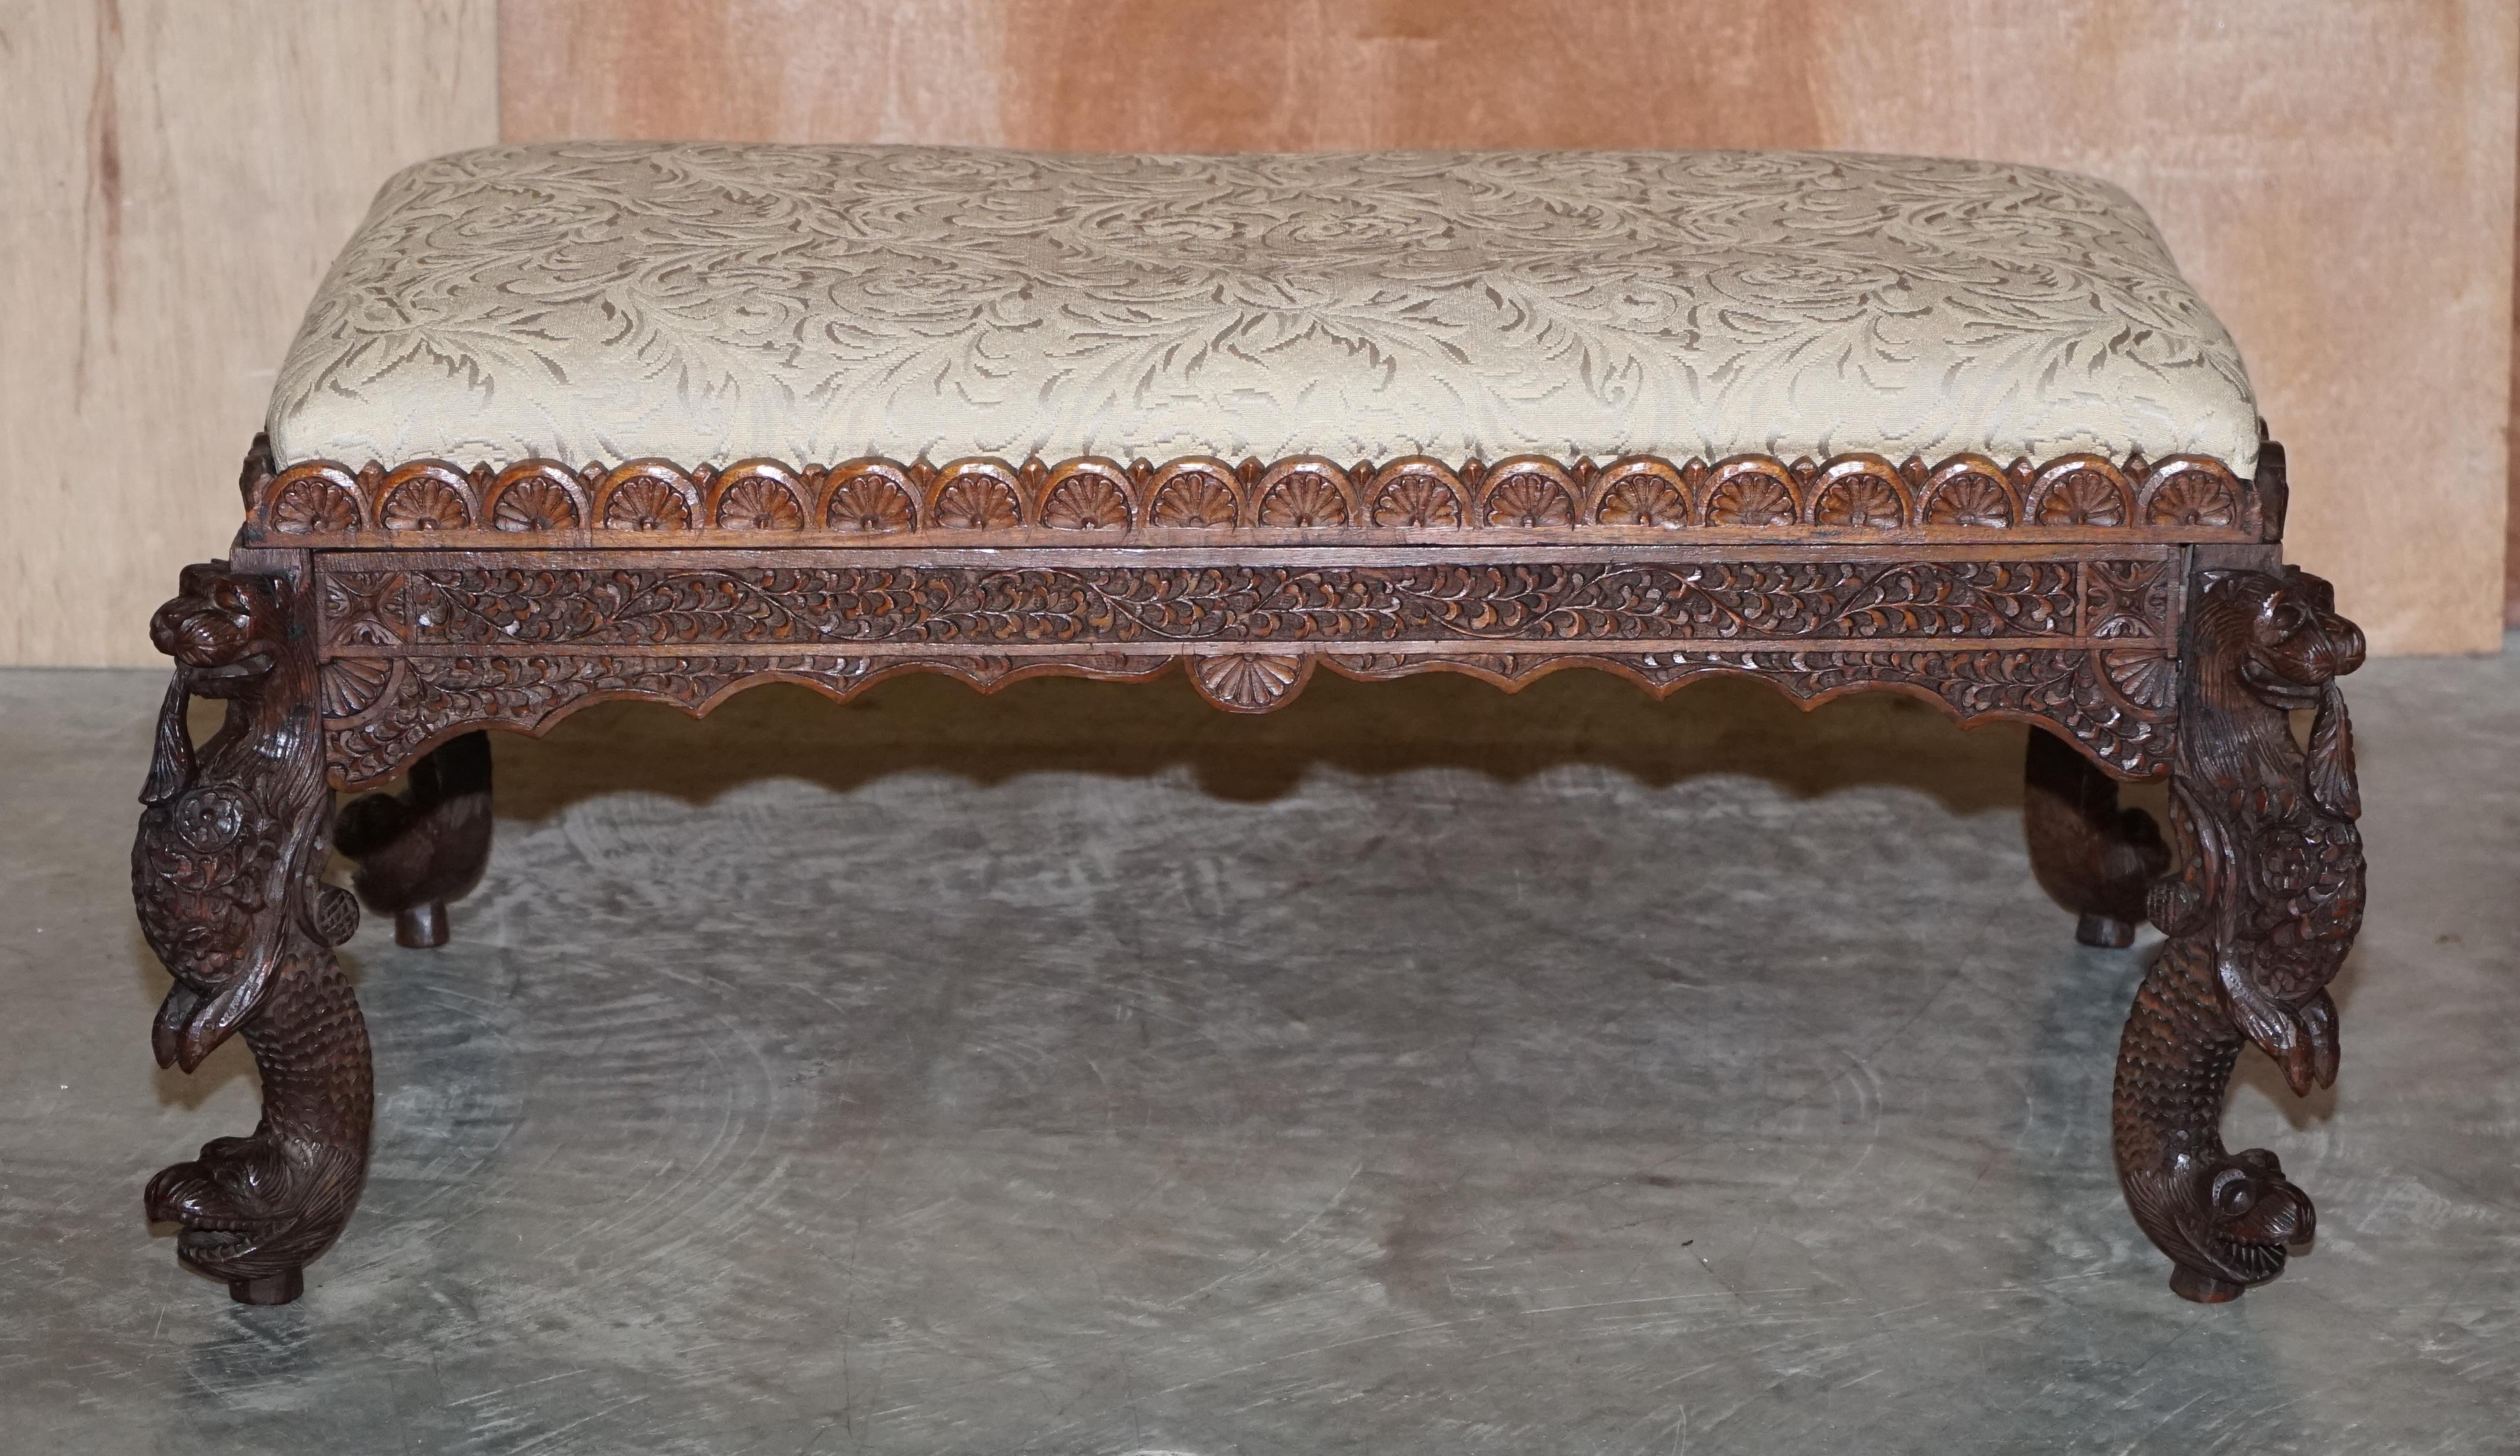 We are delighted to offer for sale this lovely circa 1880 Anglo Indian Burmese hand carved footstool ottoman 

An expertly crafted piece, this is pure art furniture and looks amazing from every angle. Anglo Indian pieces were made for the export